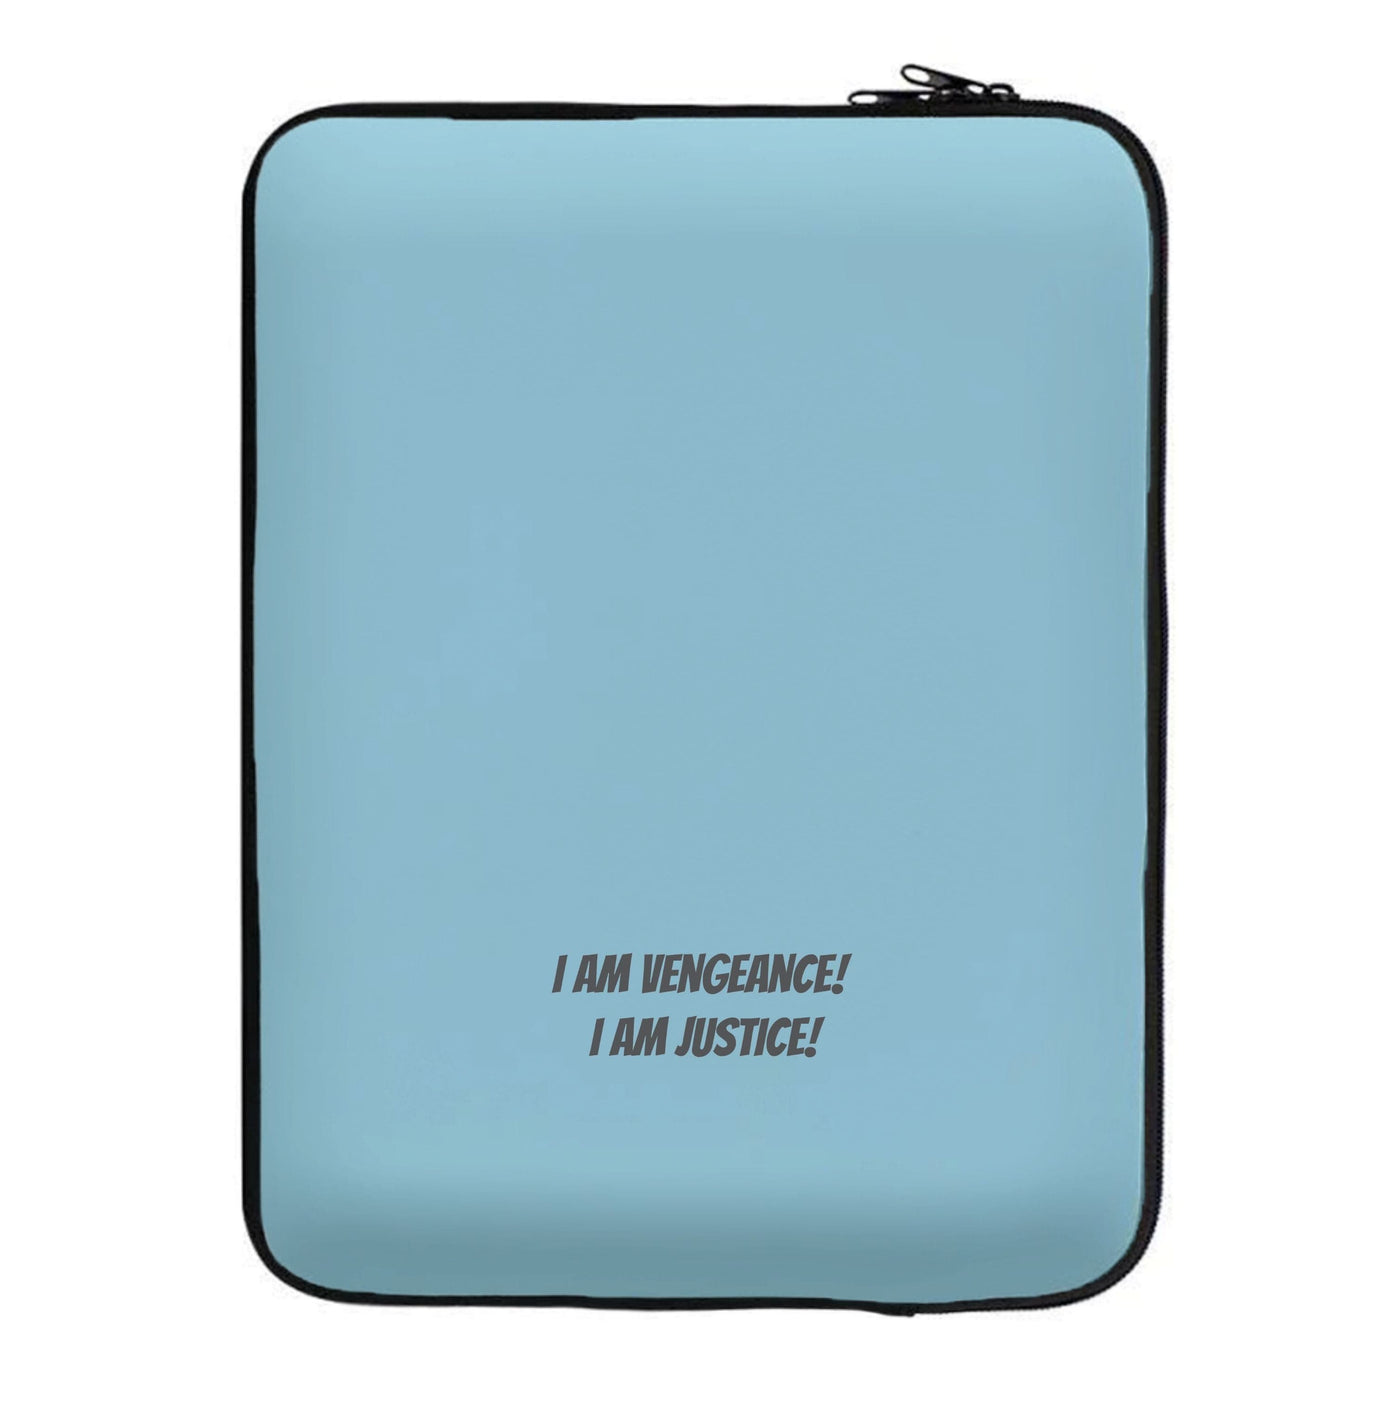 I Am Justice - Moon Knight Laptop Sleeve